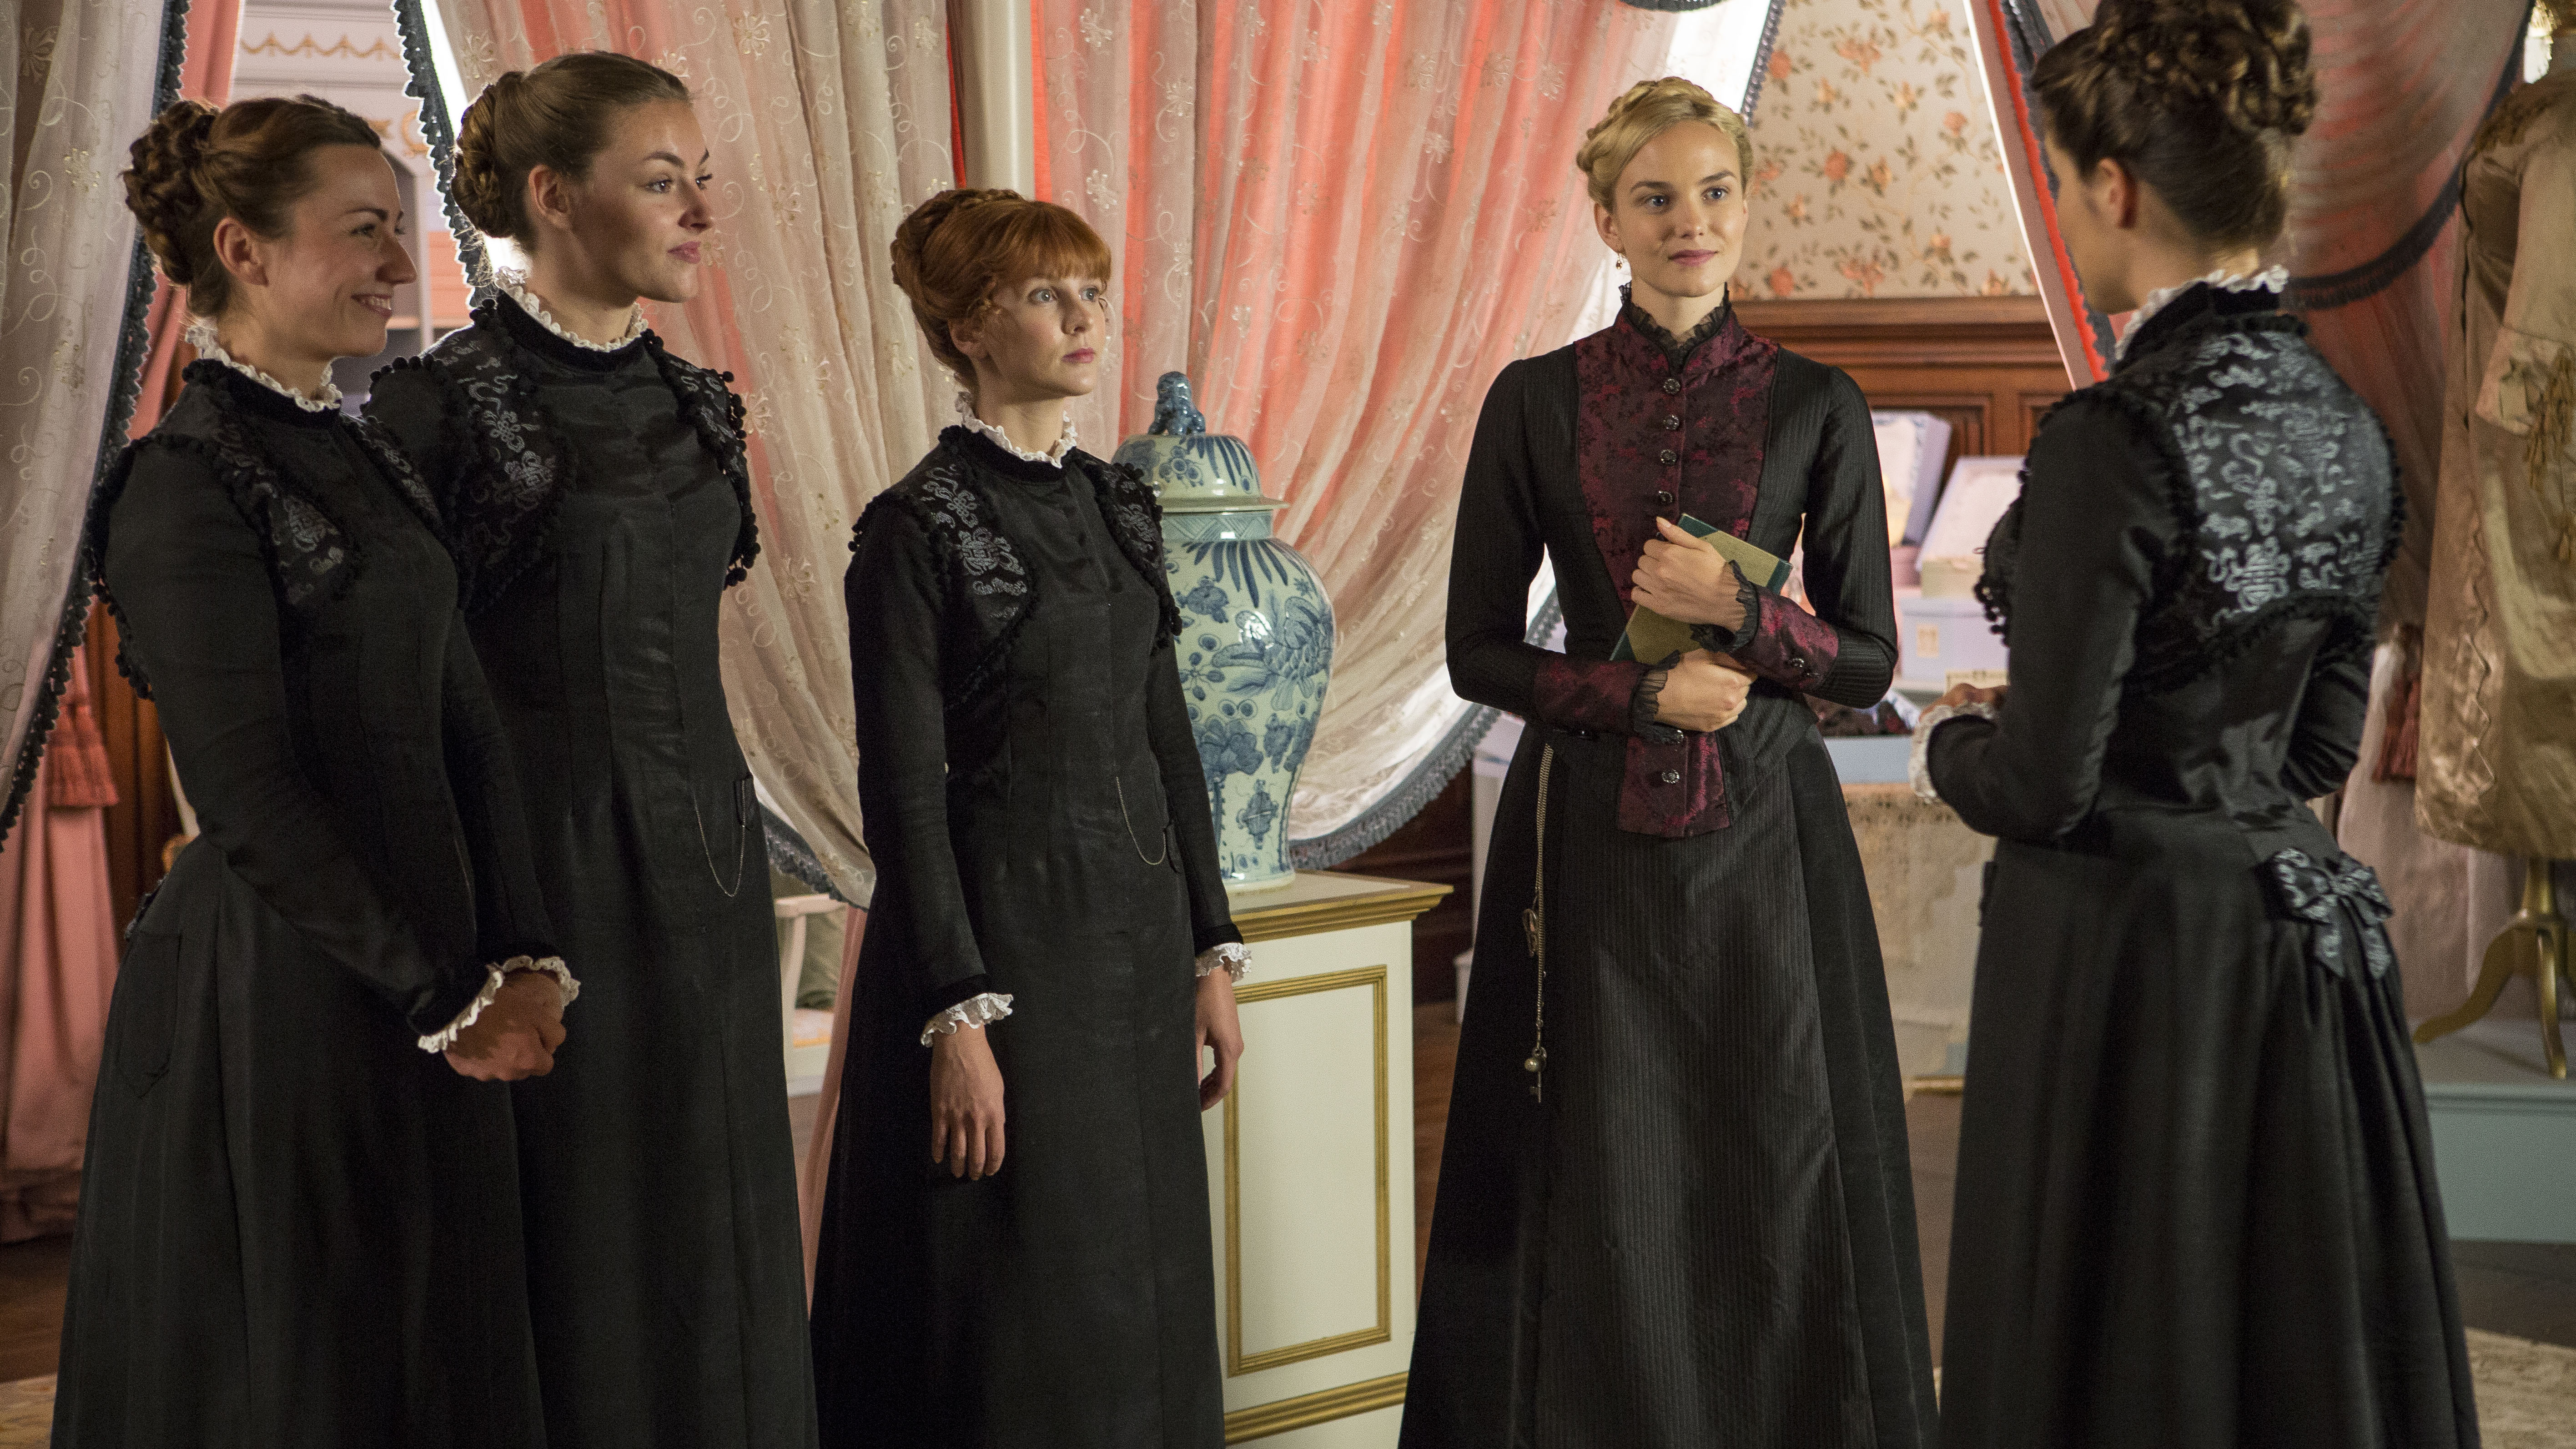 There's a new world order in Ladies' Wear (Photo: (C) Jules Heath/BBC 2013 for MASTERPIECE)